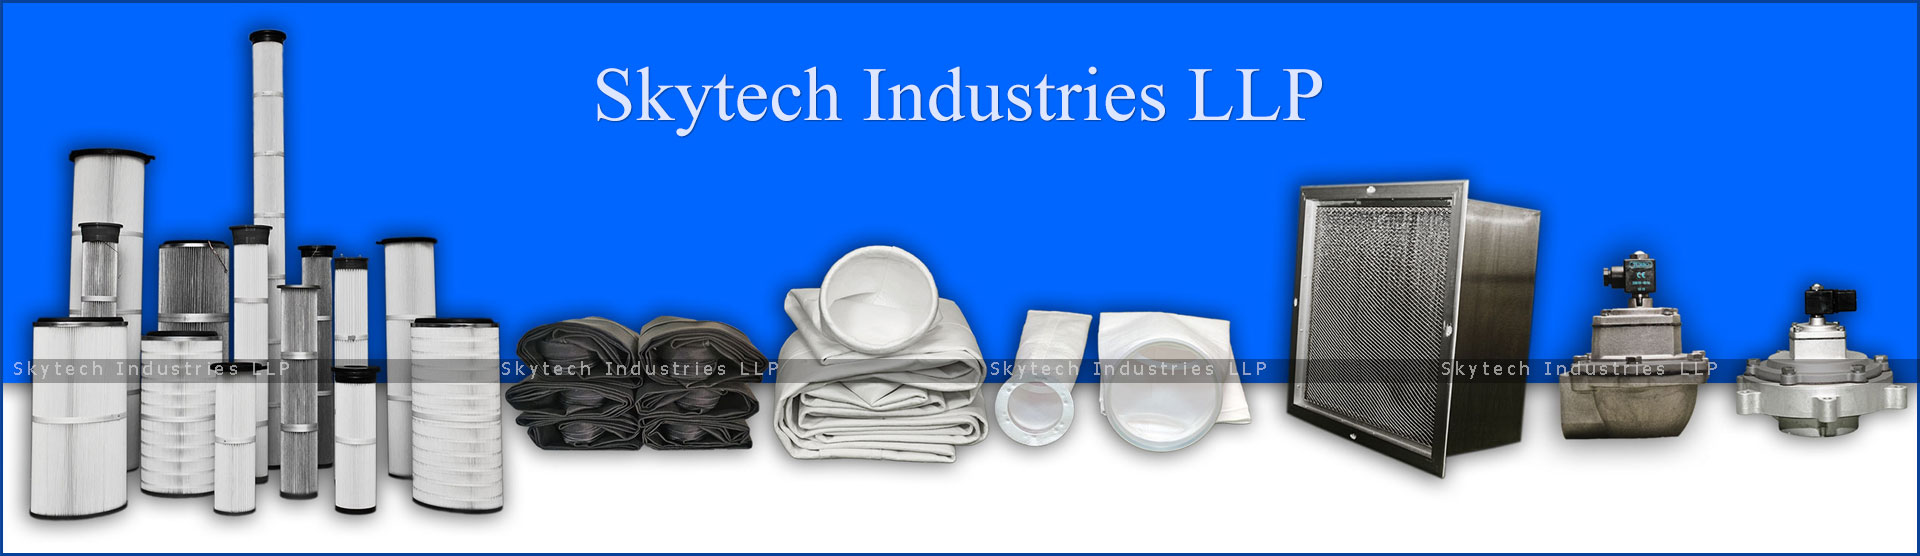 About Skytech Industries LLP